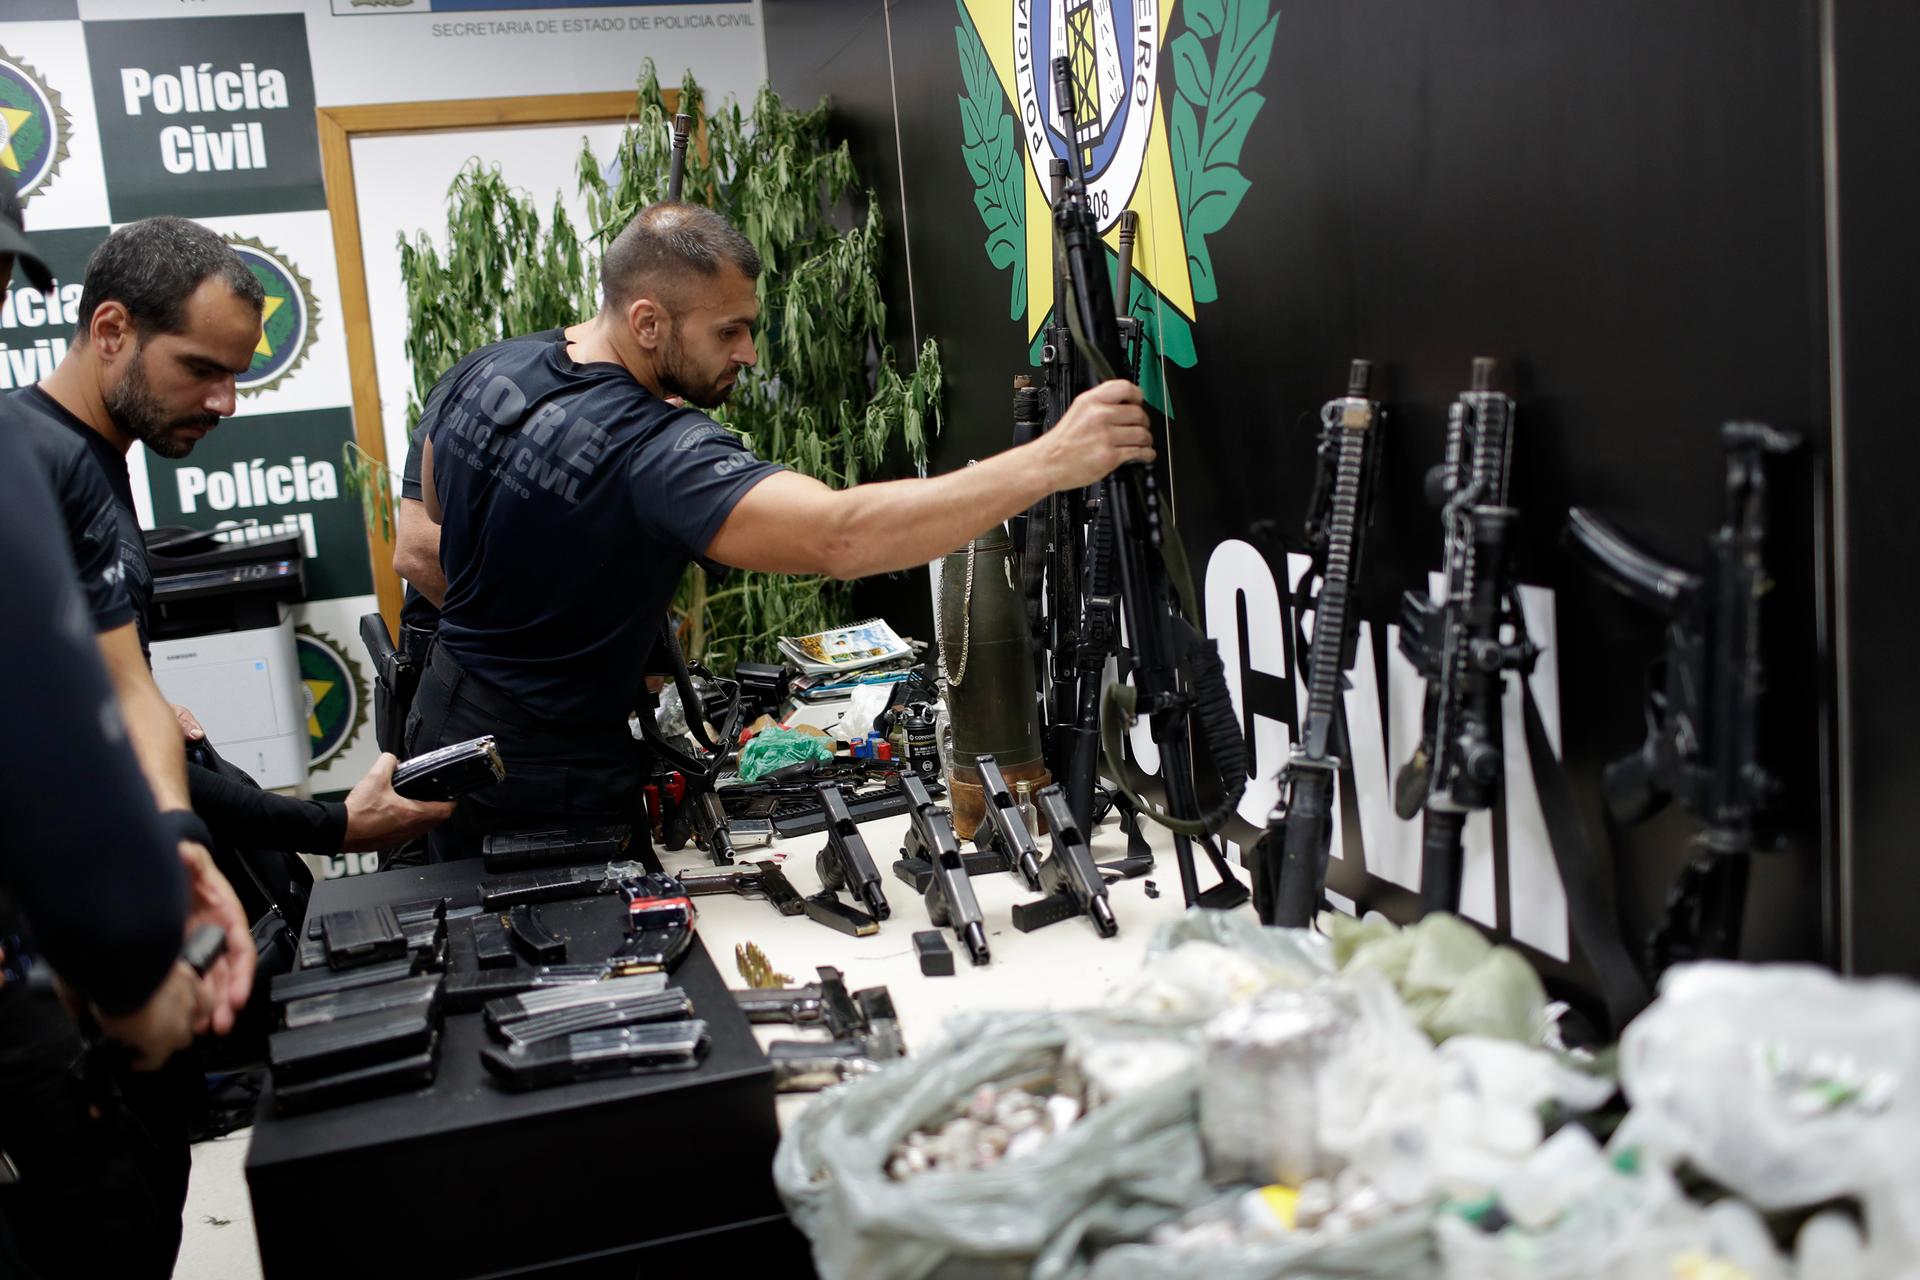 Weapons and drugs seized during a police raid are displayed for the press at city police headquarters in Rio de Janeiro, Brazil, May 6, 2021. 